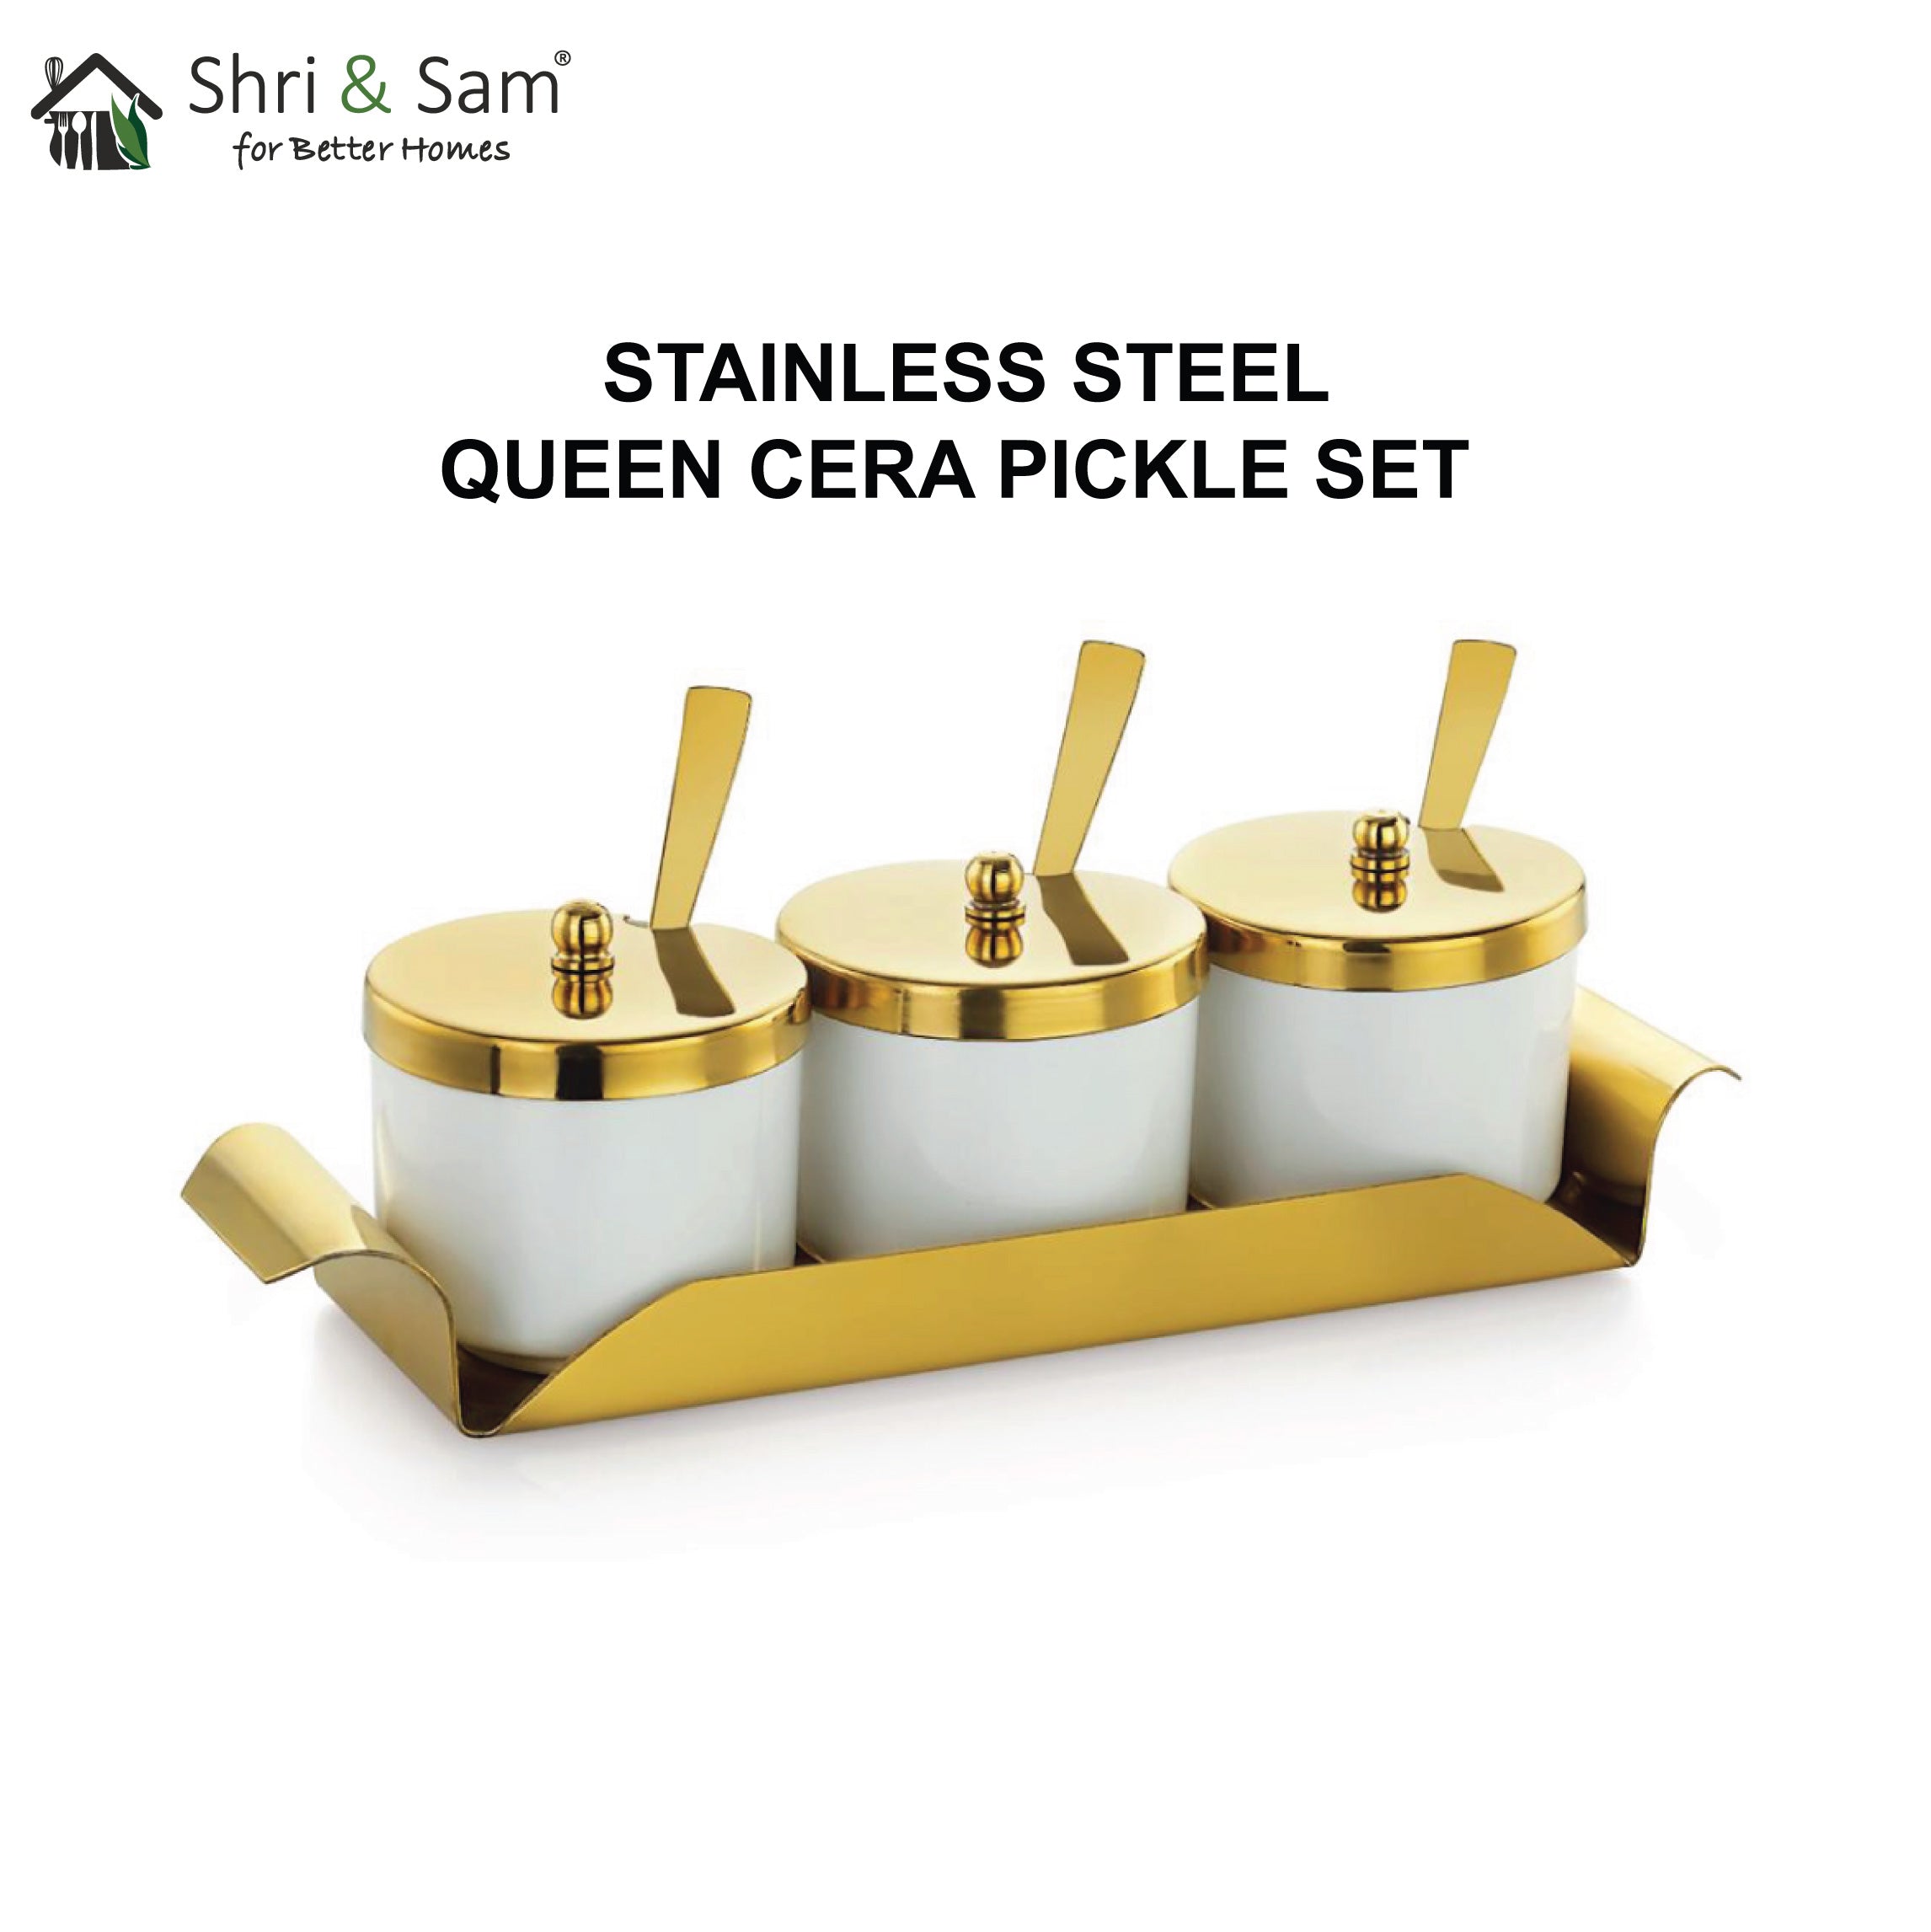 Stainless Steel 3 PCS Queen Cera Pickle Set